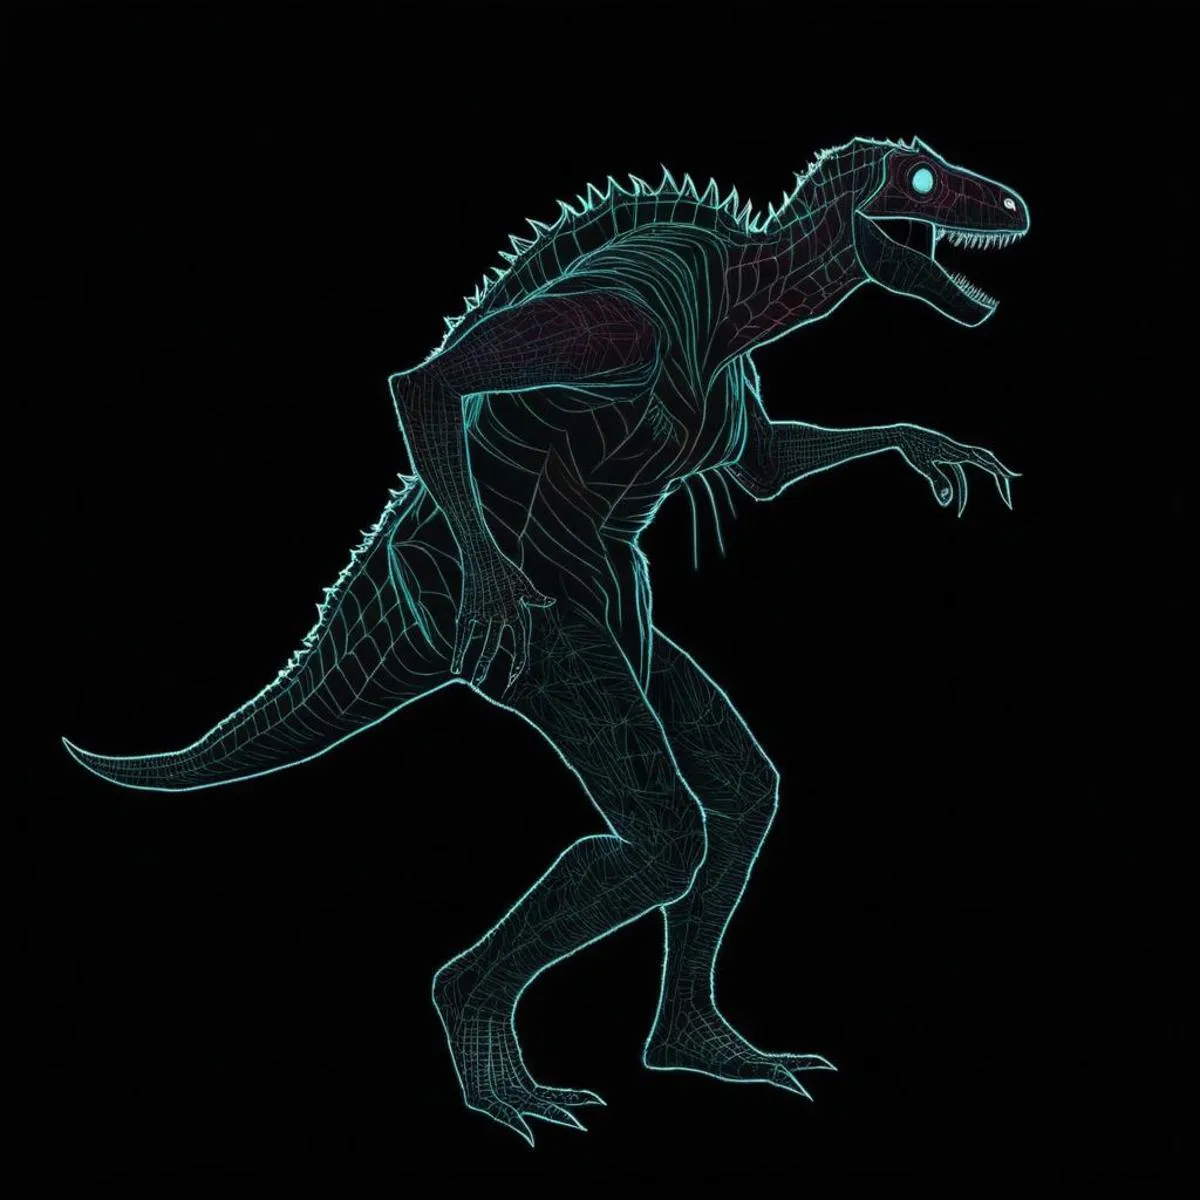 This AI generated image using stable diffusion depicts a neon outline of a dinosaur against a black background, showcasing digital art.